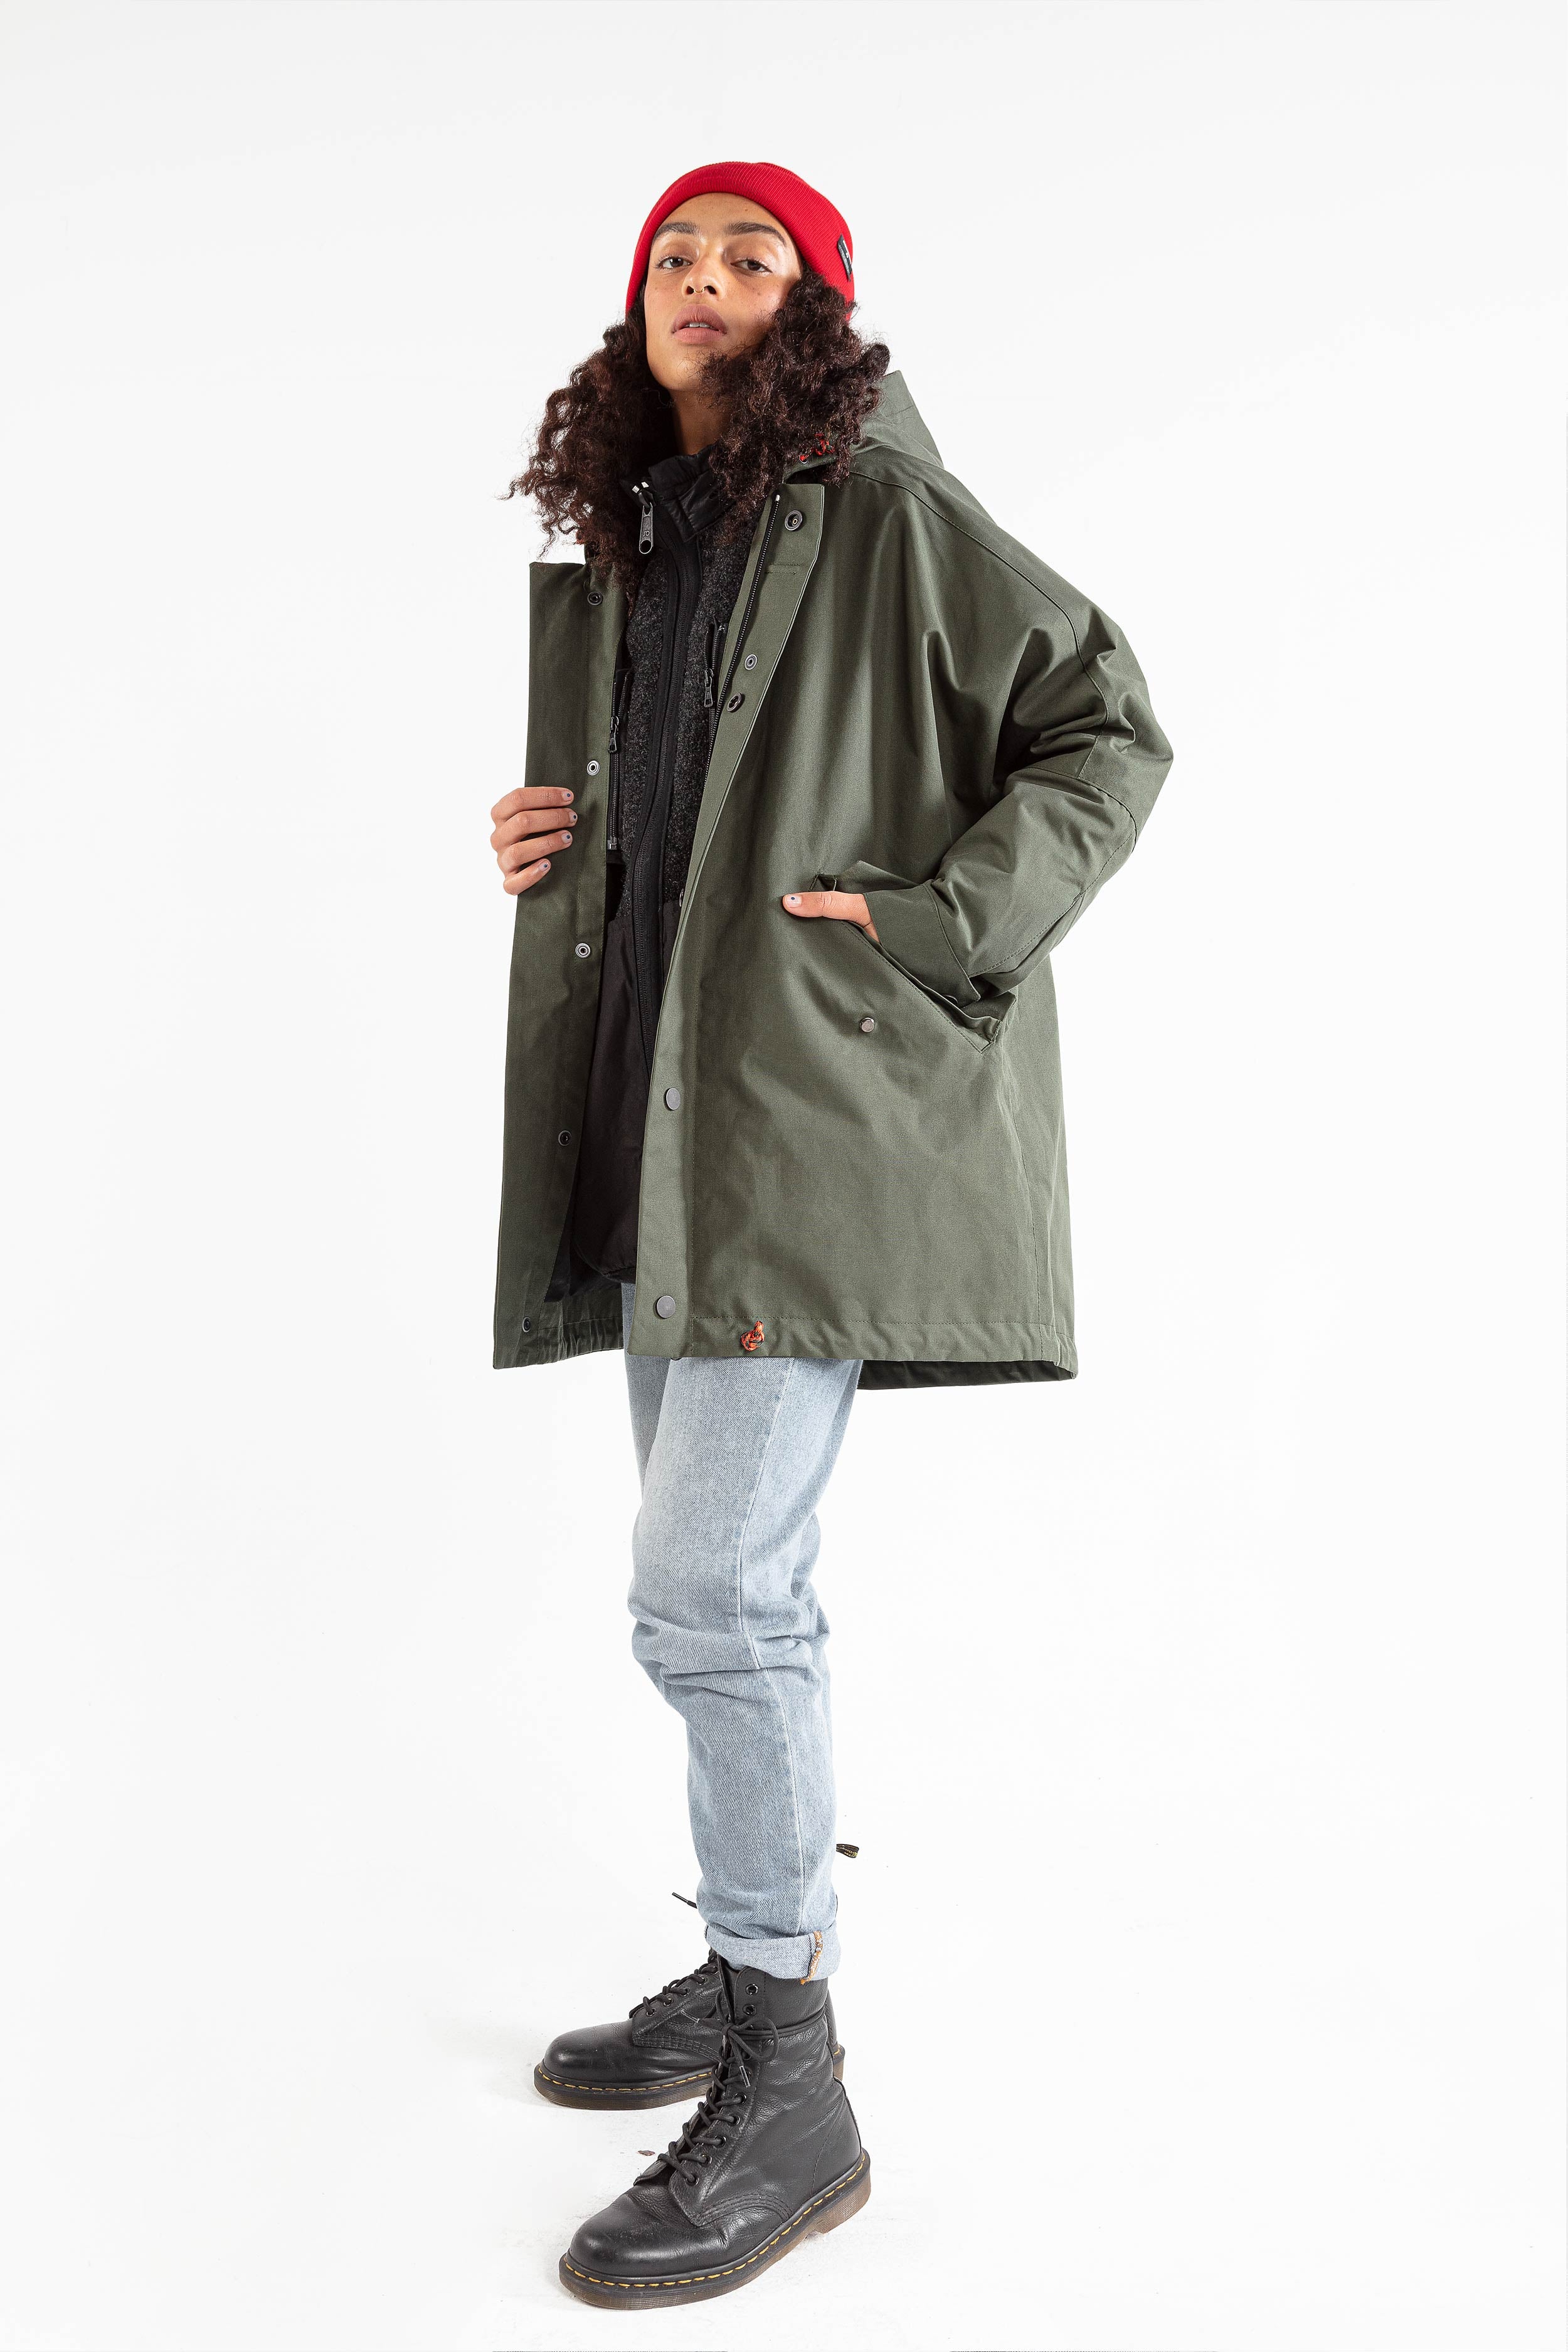 JECKYBENG-The-LADIES-COAT-06 wood-green